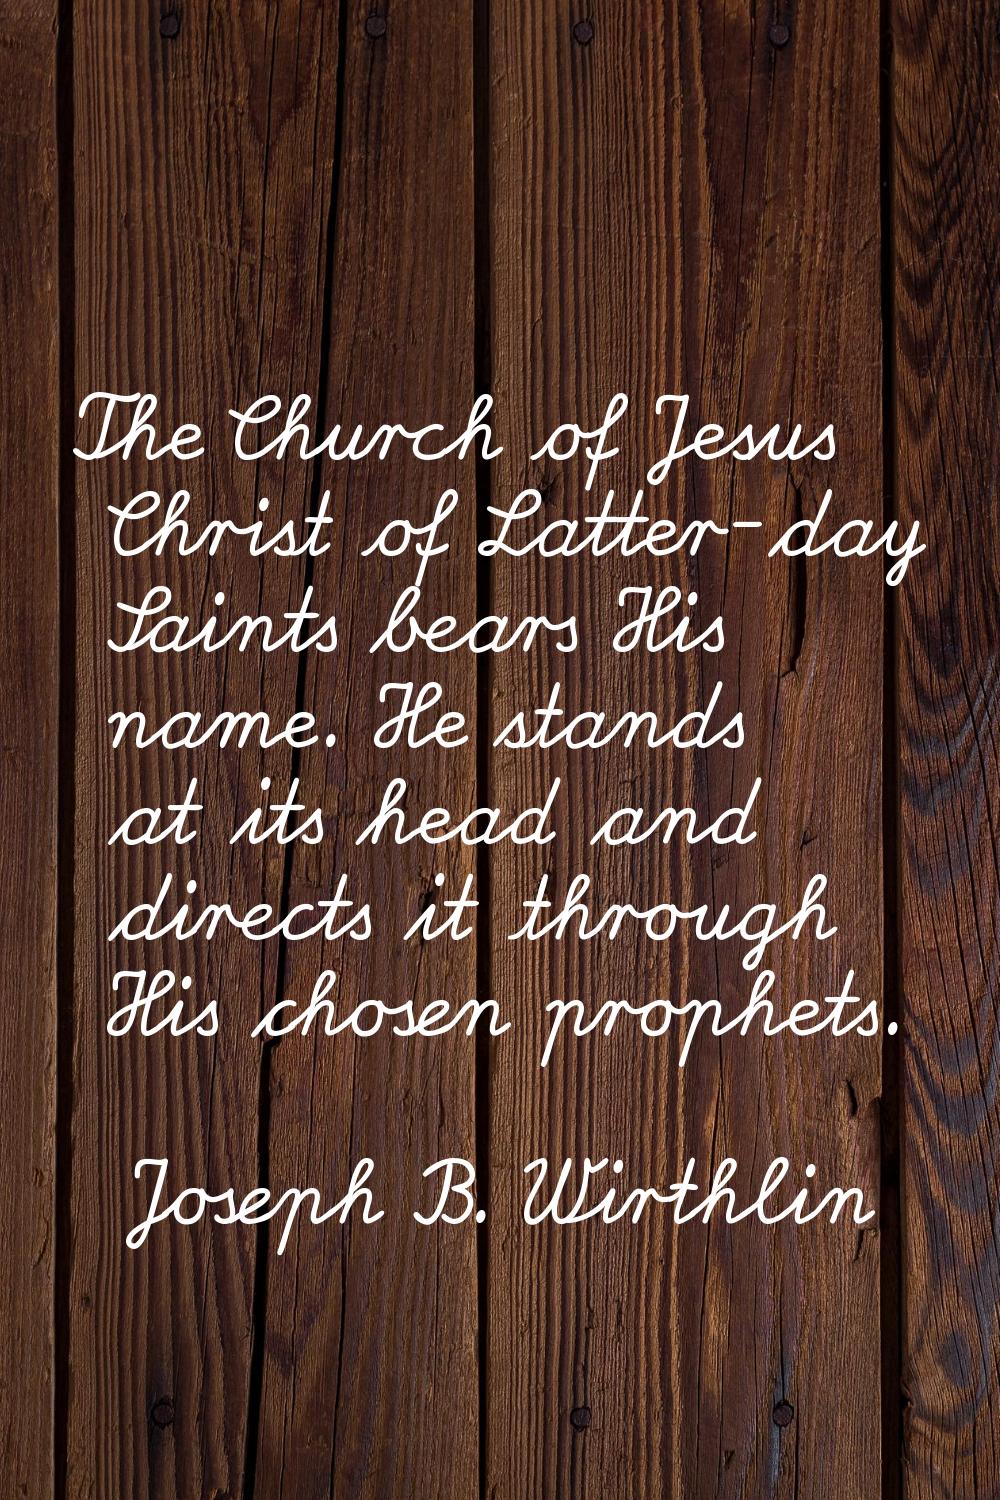 The Church of Jesus Christ of Latter-day Saints bears His name. He stands at its head and directs i